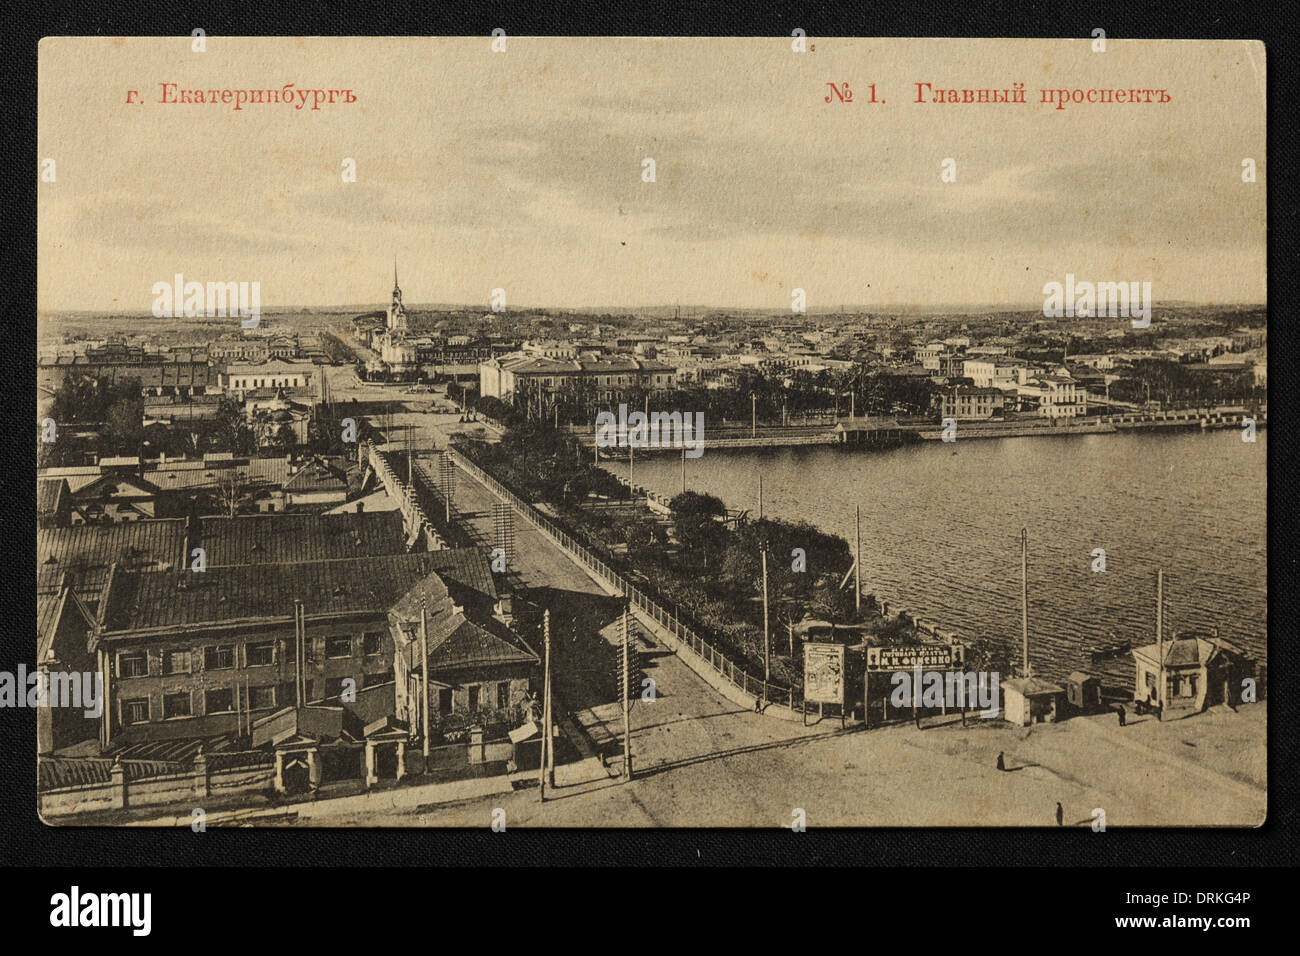 Main Avenue with the Imperial Lapidary Factory and the plant dam on the Iset River in Yekaterinburg, Russian Empire. Black and white vintage photograph probably by Austrian photographer Josef Rona dated from the beginning of the 20th century issued in the Russian vintage postcard published by Josef Rona (Iosif Rona) himself in Yekaterinburg. Text in Russian: Yekaterinburg. Glavny Prospekt Avenue (Main Avenue). The plant dam of the City Pond (Gorodskoy Pond) on the Iset River and the Imperial Lapidary Factory (L) are seen in the photo. The plant dam on the Iset River was built in 1723 for the Y Stock Photo